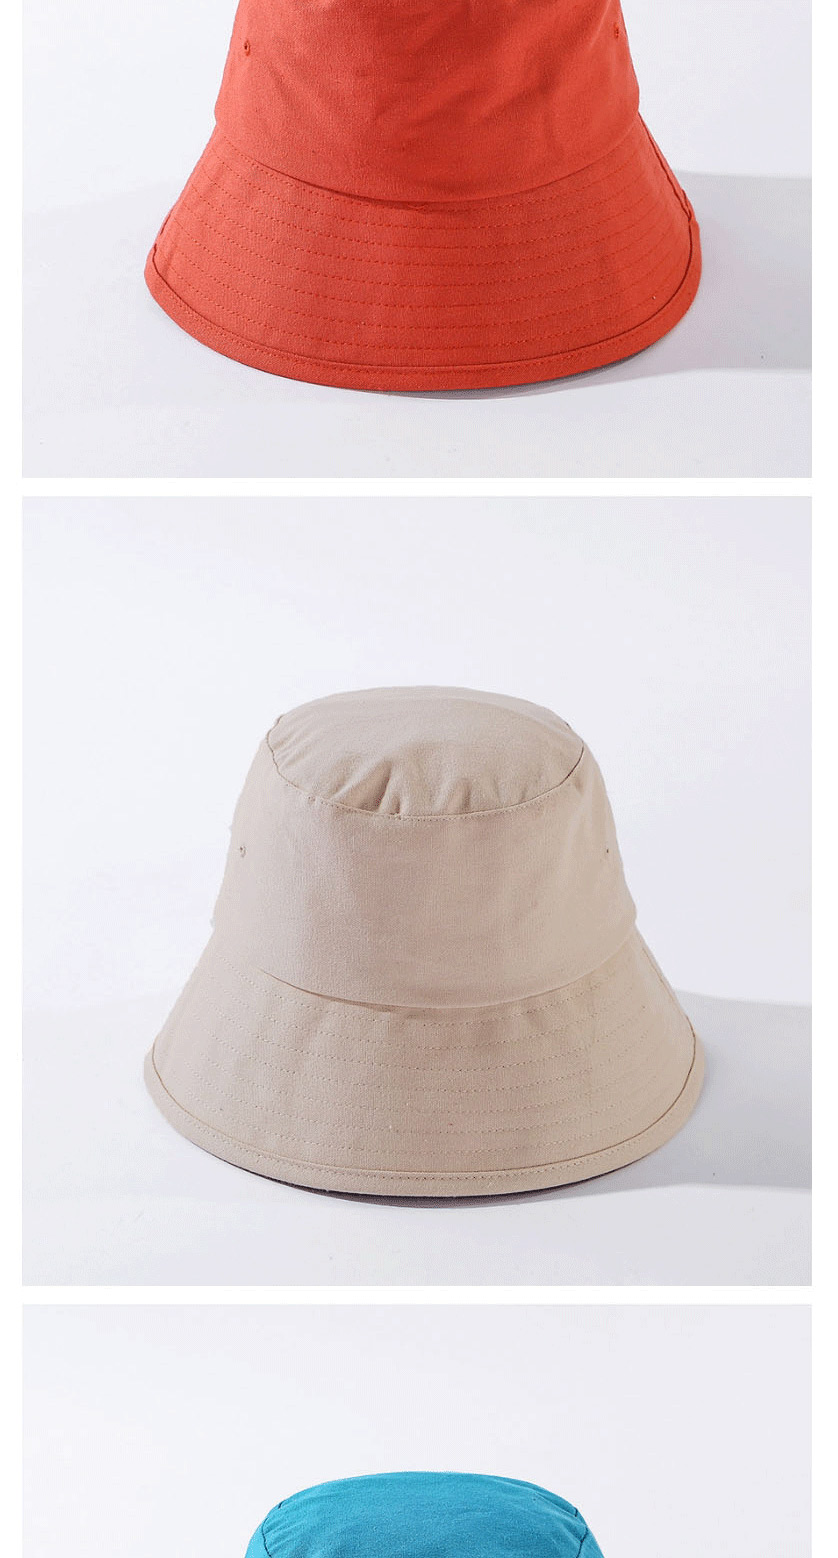 Fashion Red Pure Color Fisherman Hat,Sun Hats